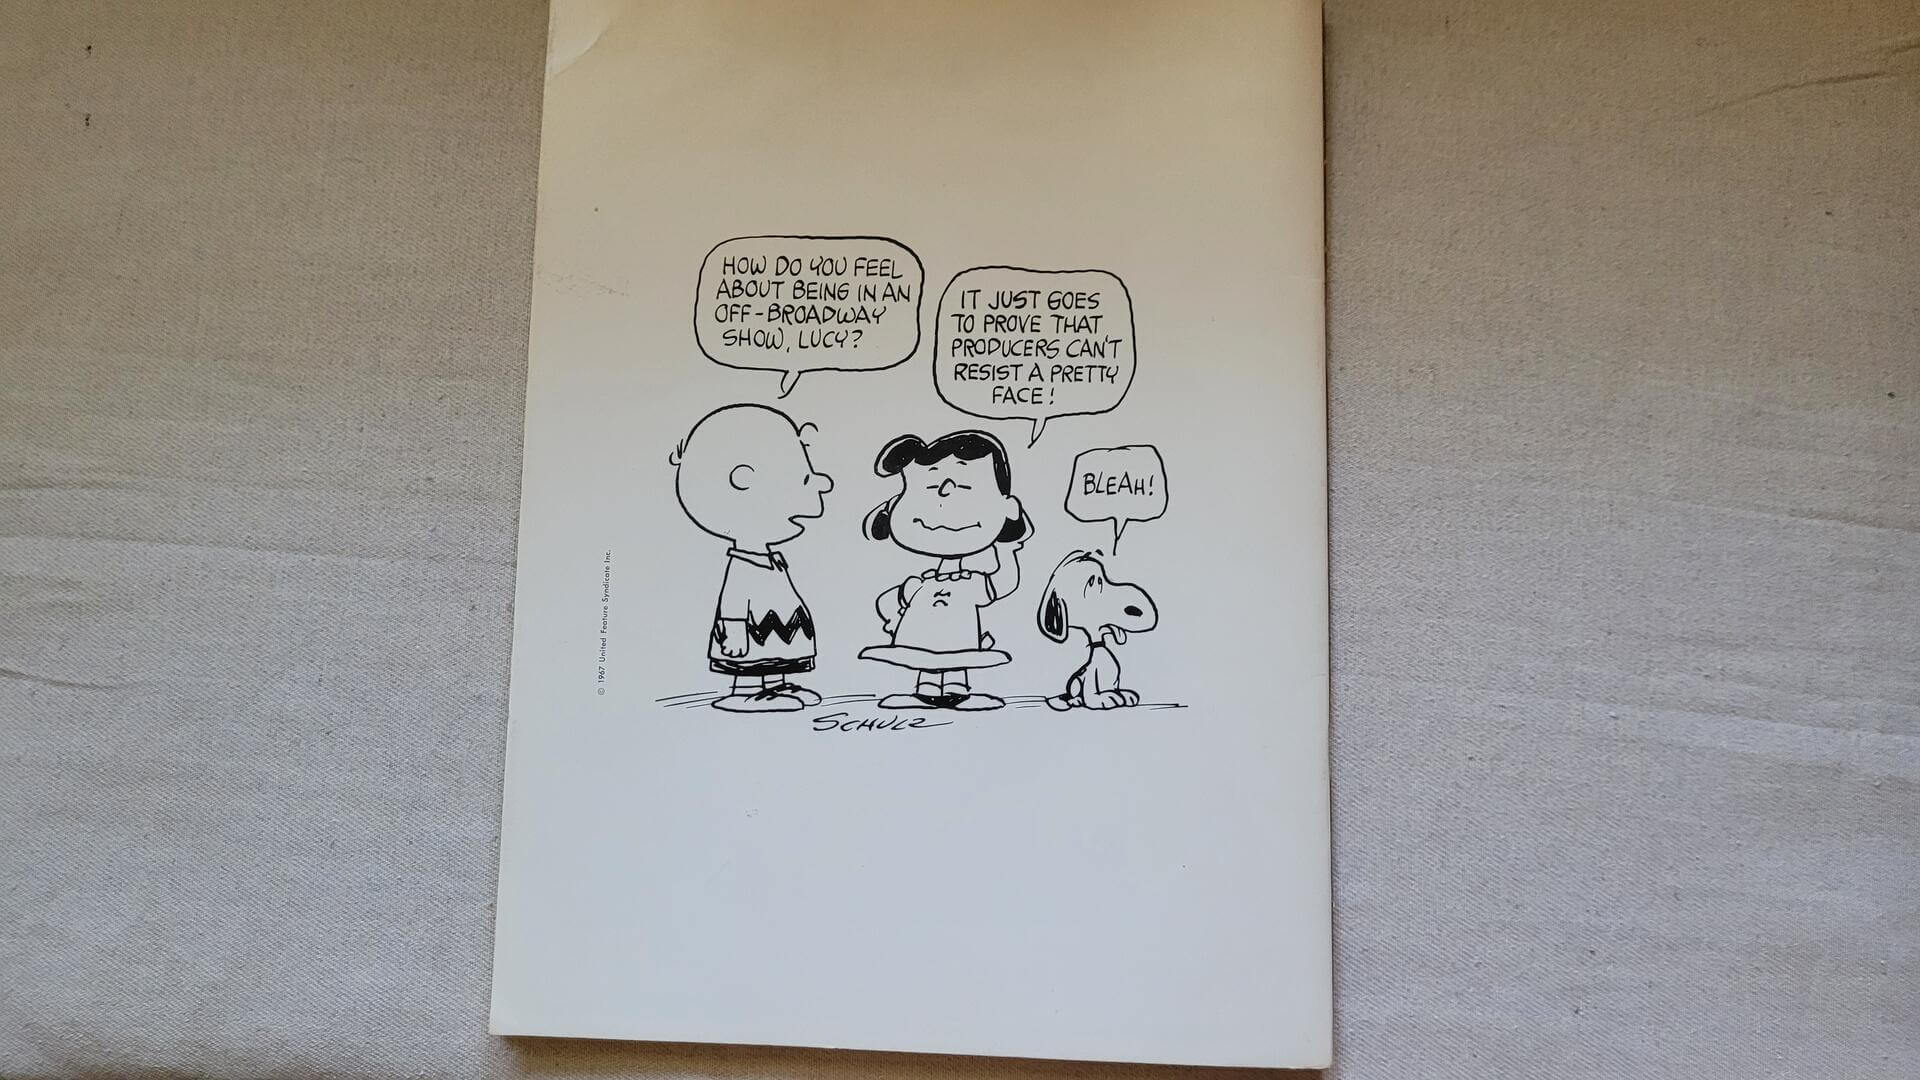 1967 You’re A Good Man, Charlie Brown Sheet Music Book by A Whitelaw G Persson - A new musical entertainment based on a comic strip Peanuts by Charles M Schulz, music and lyrics by Clark Gesner. Rare 1967 collectible music and comic book memorabilia